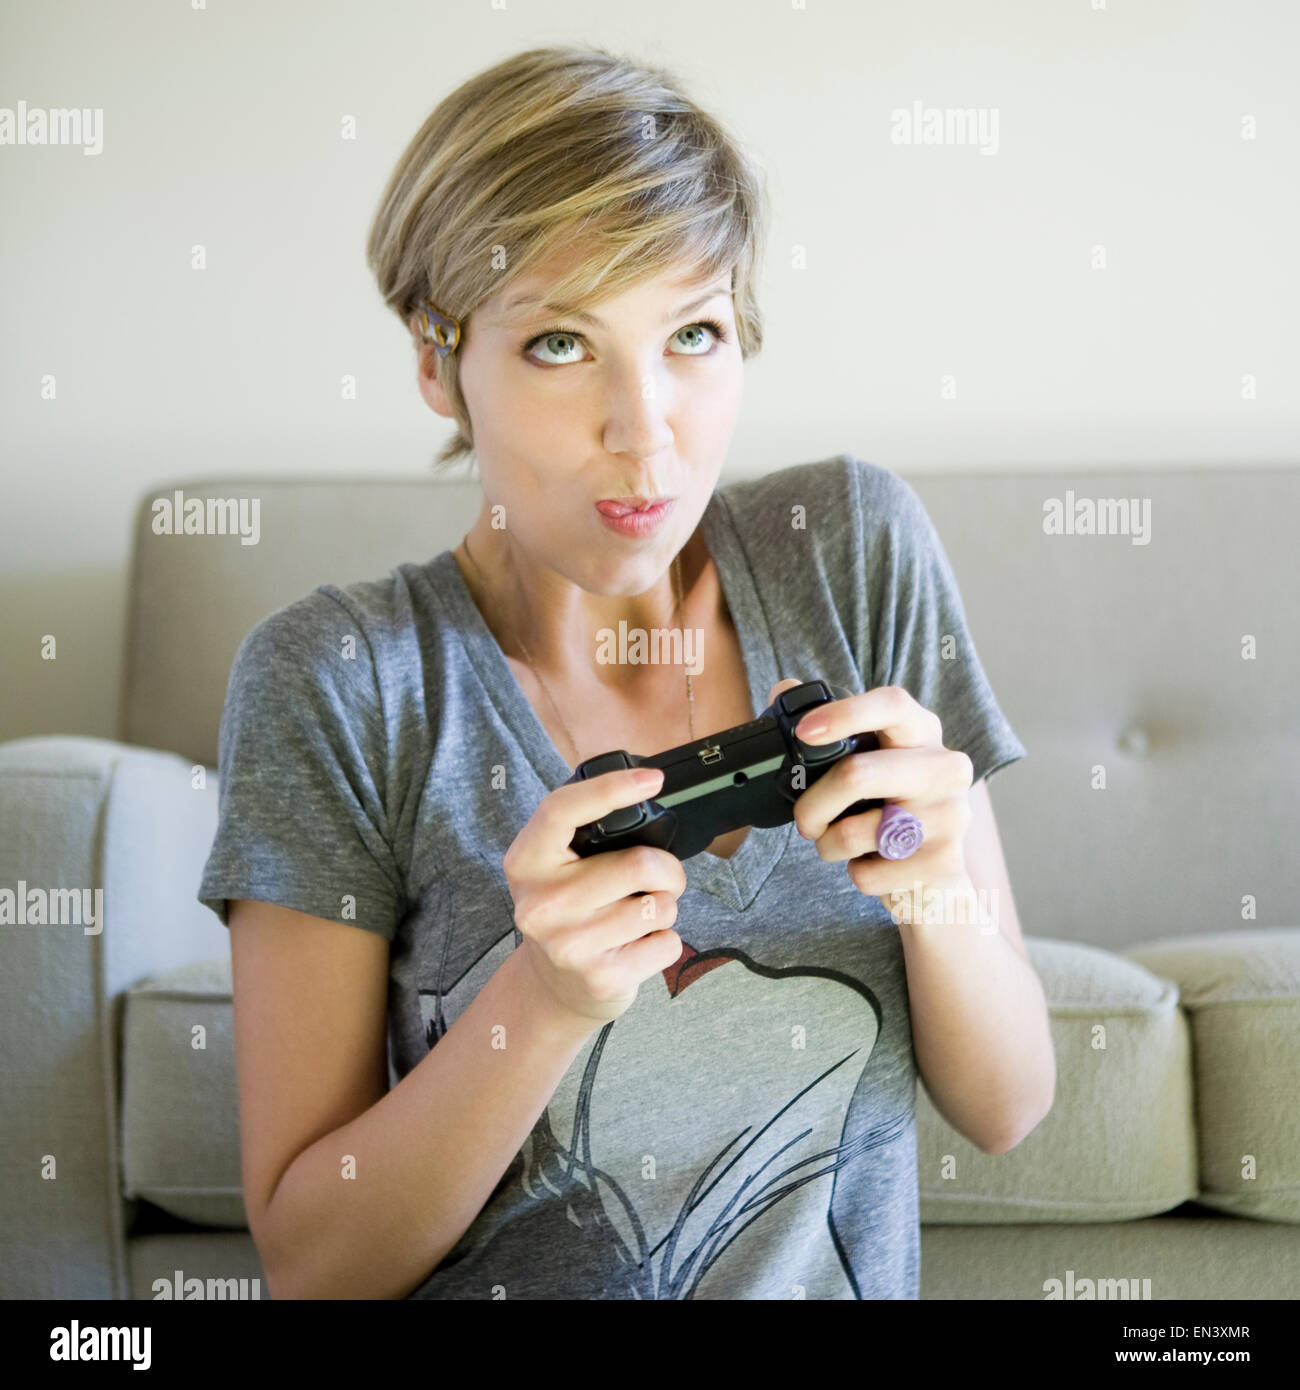 woman holding a video game controller Stock Photo